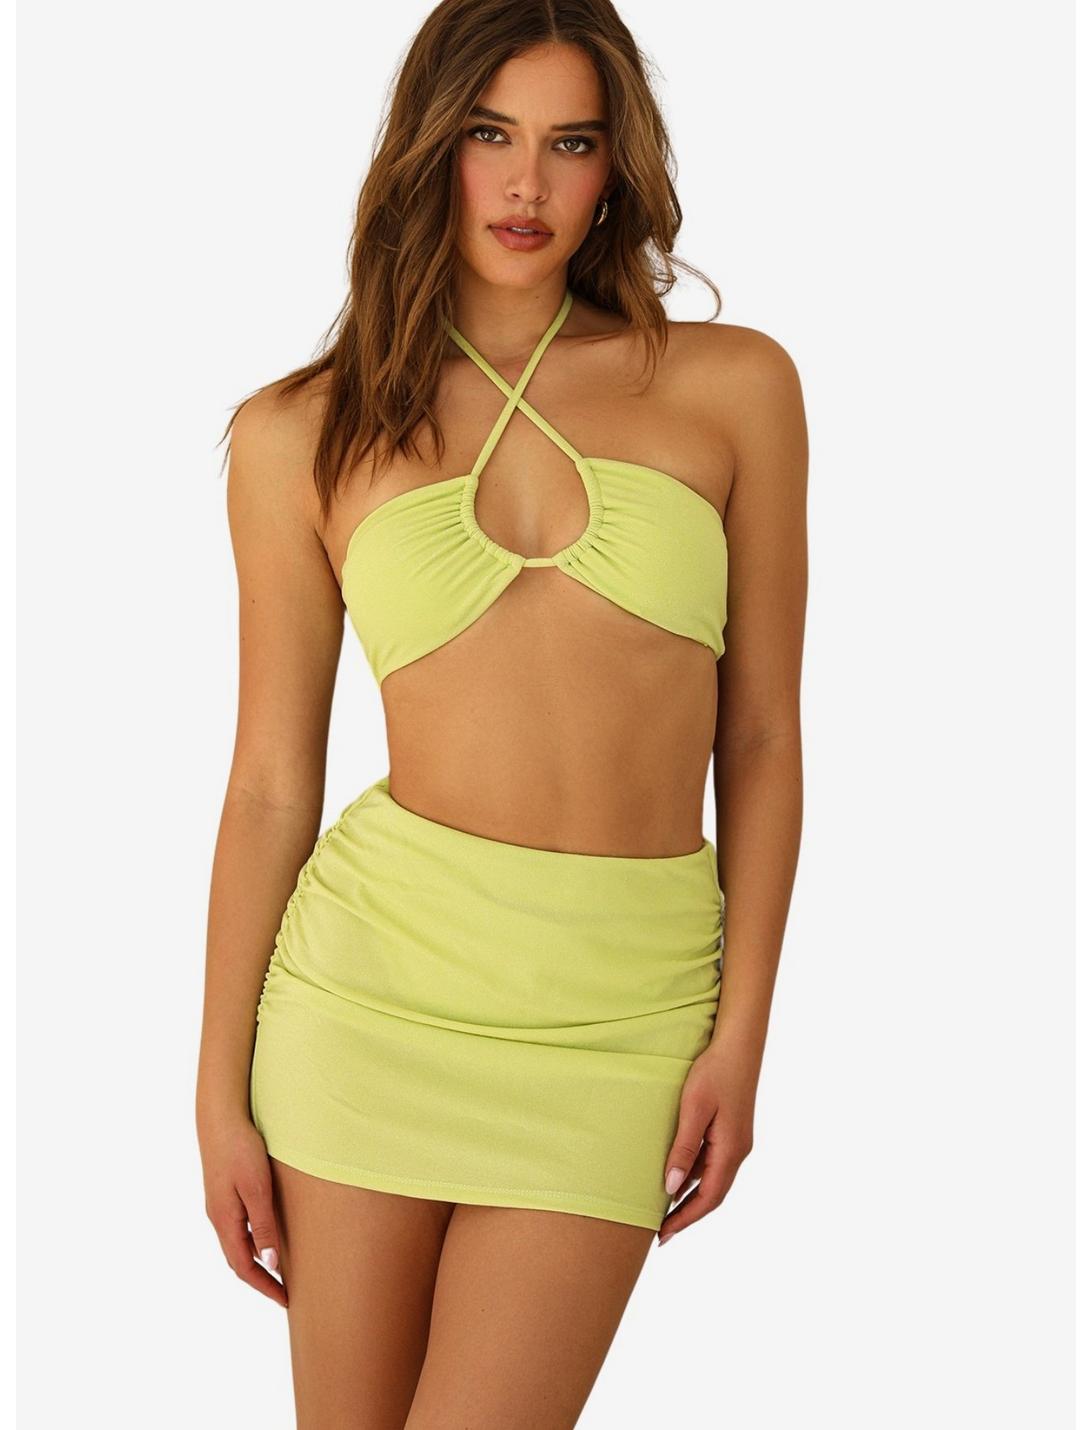 Dippin' Daisy's Lucky Swim Skirt Cover-Up Lime Green, GREEN, hi-res